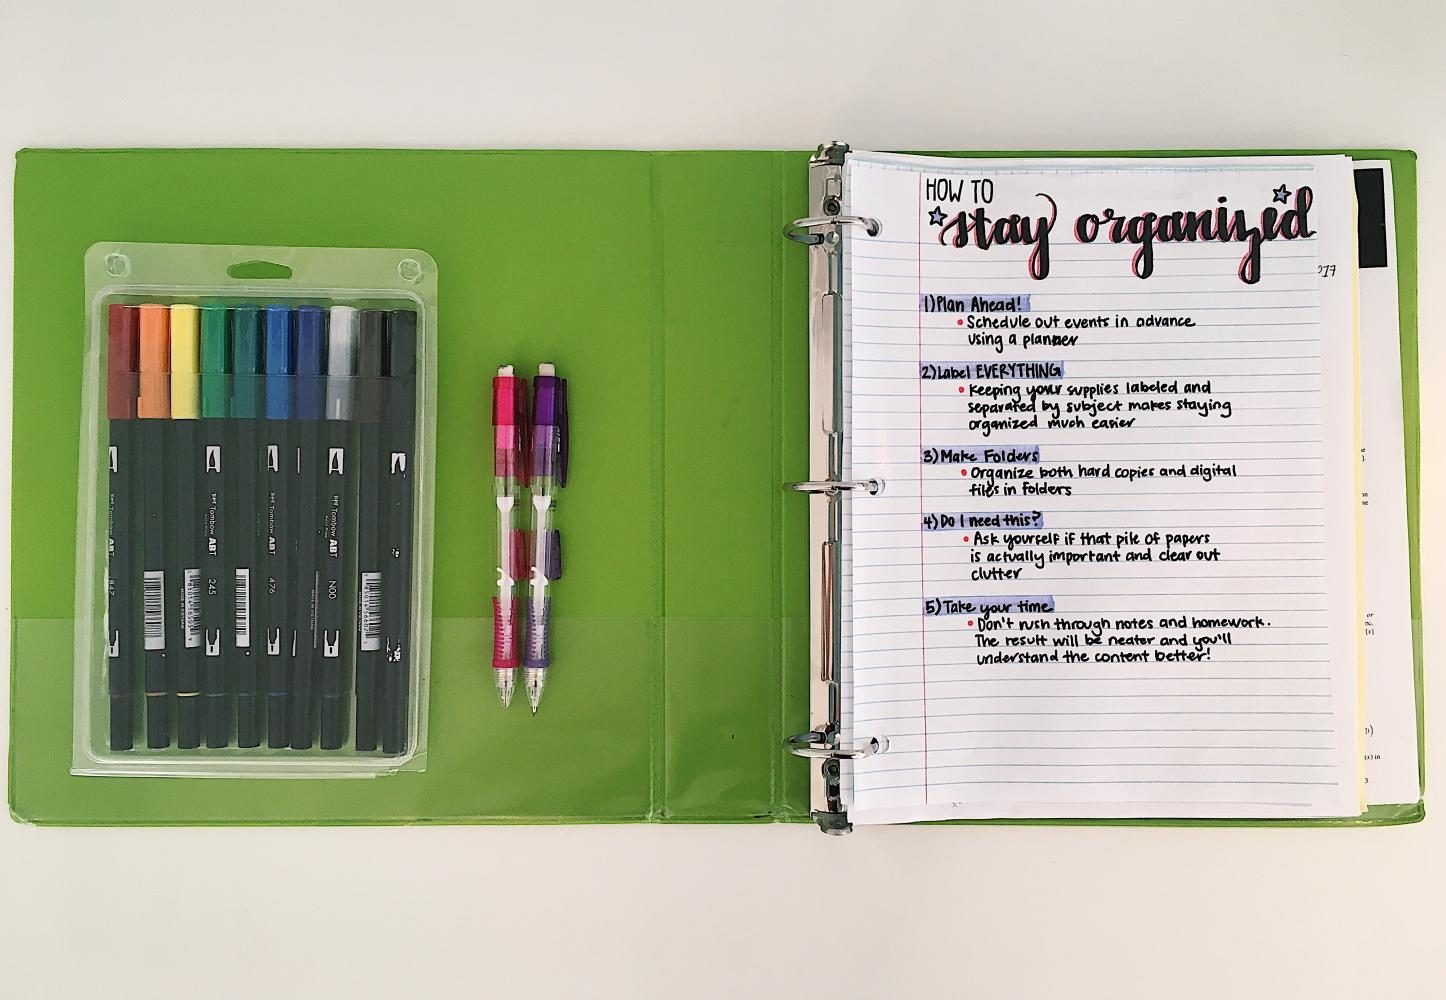 Follow these tips for a more organized study space